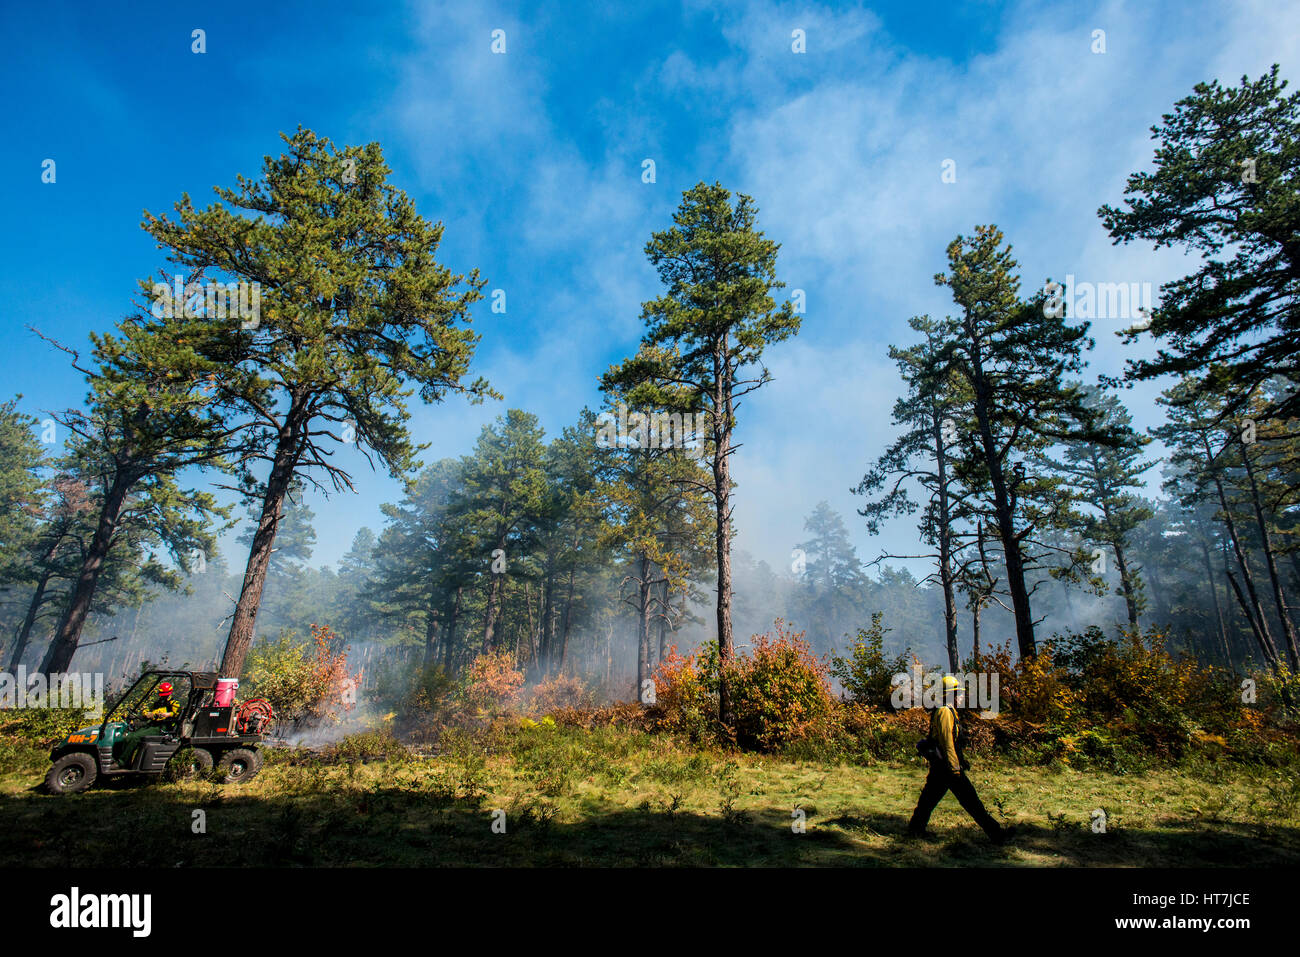 Smoke Rising In The Understory Of The Pine Barrens With Fire Fighters working At The Perimeter Stock Photo